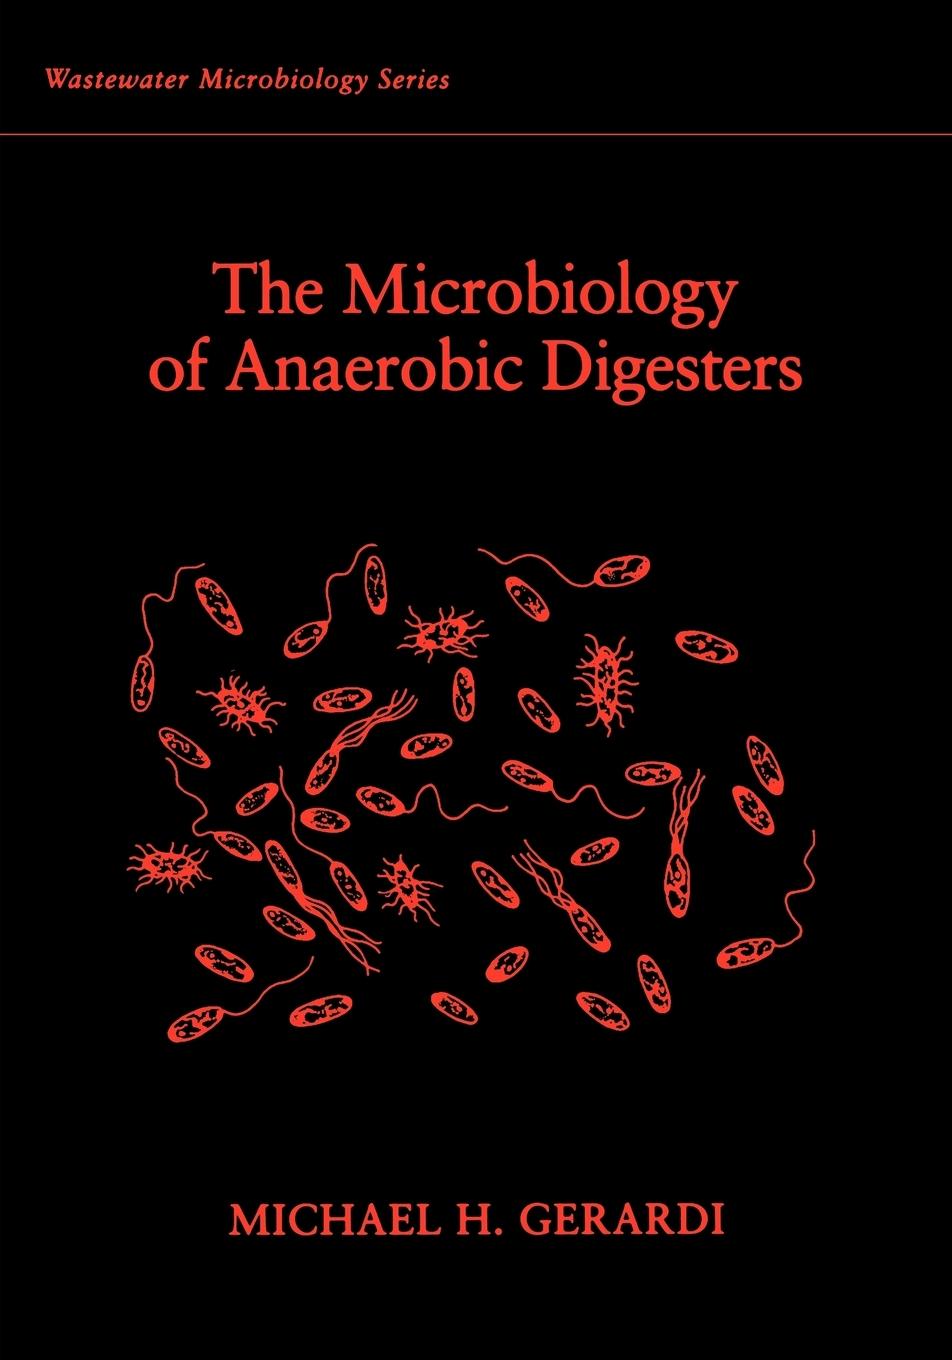 The Microbiology of Anaerobic Digesters - Michael H. Gerardi